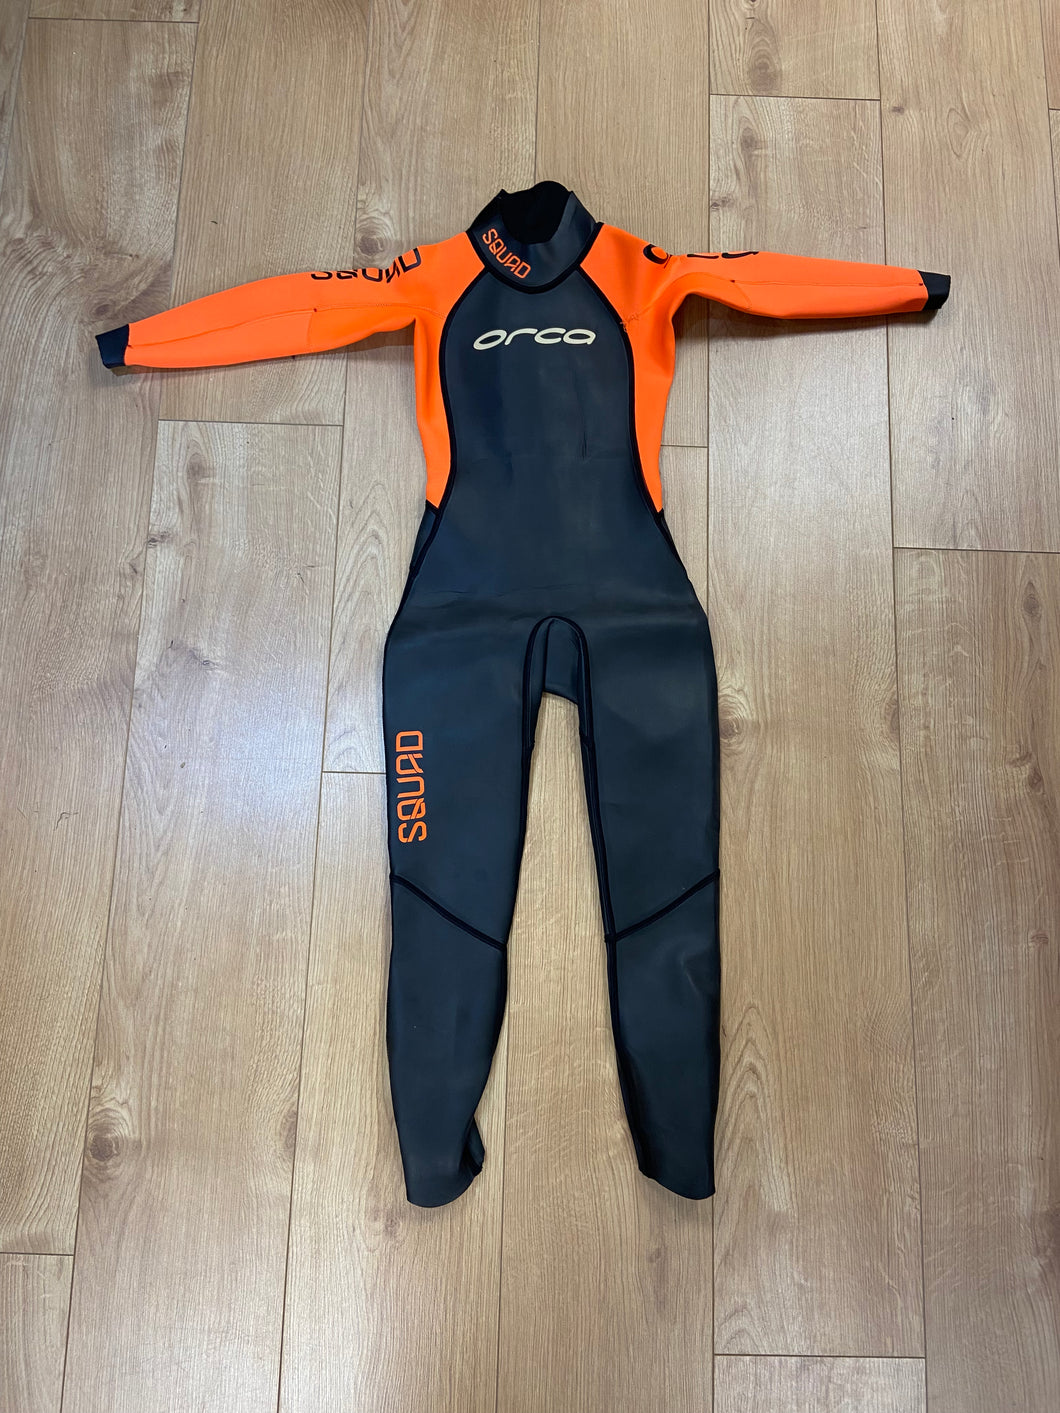 Pre Loved Orca Squad Open Water Swimming Kids Wetsuit Size 8 (755) - Grade B